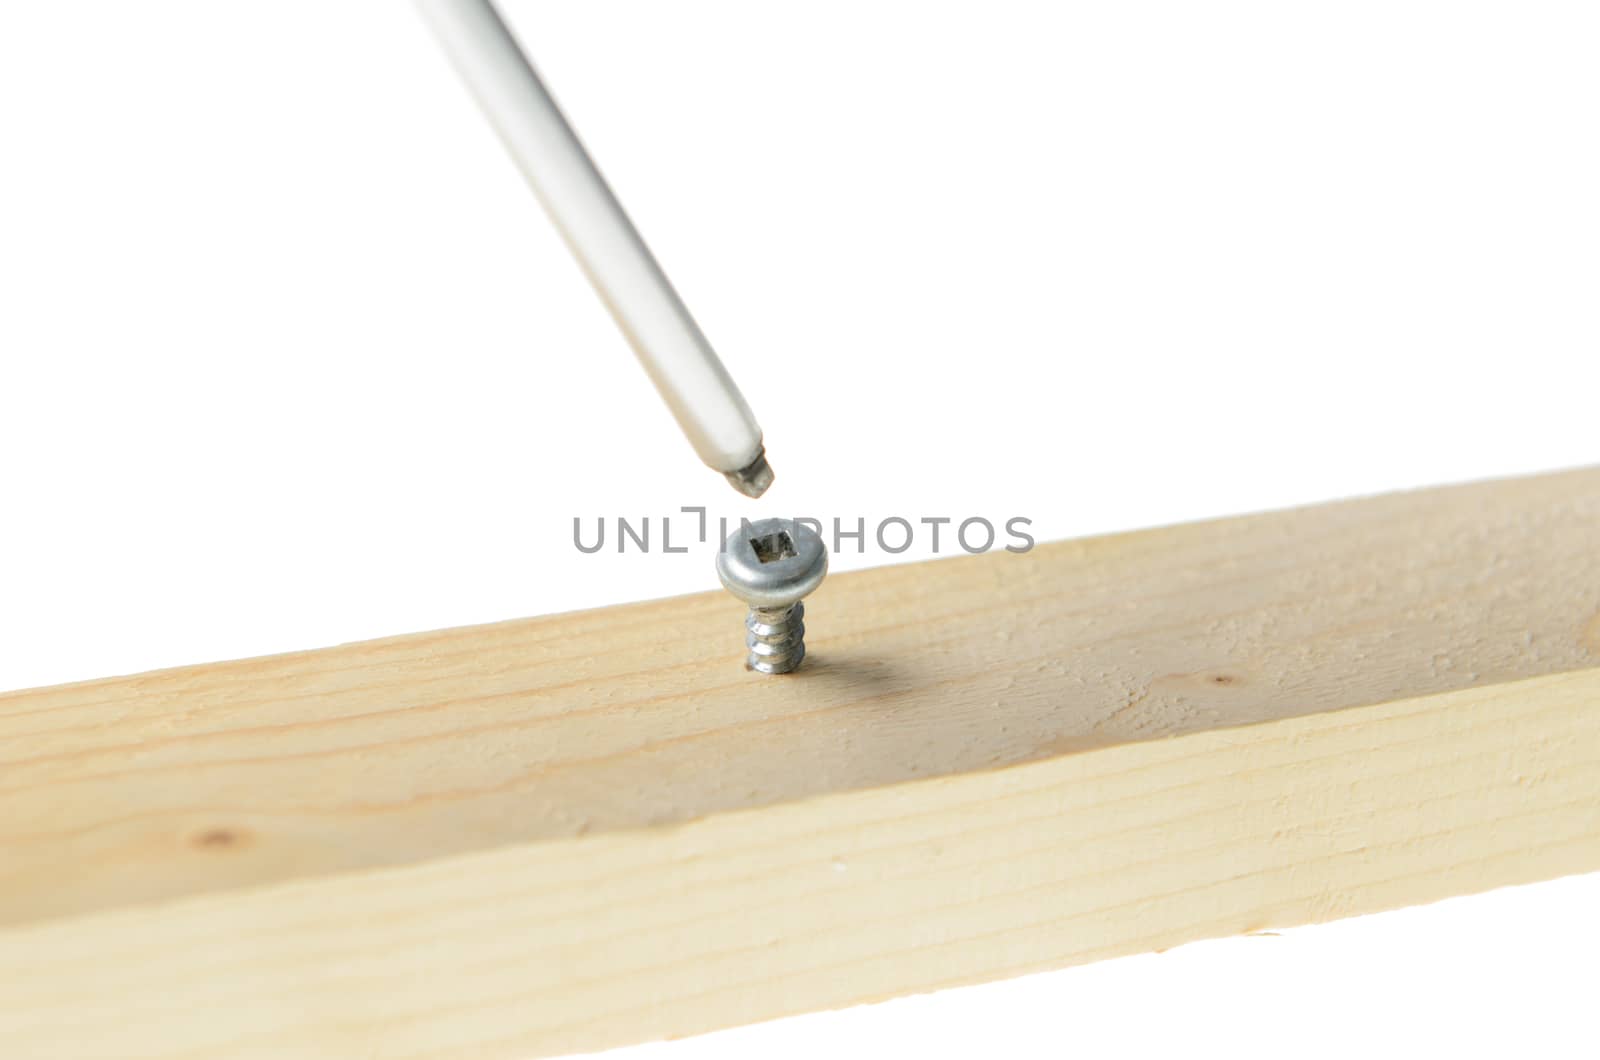 Robertson screwdriver screwing into wood, isolated on white background.